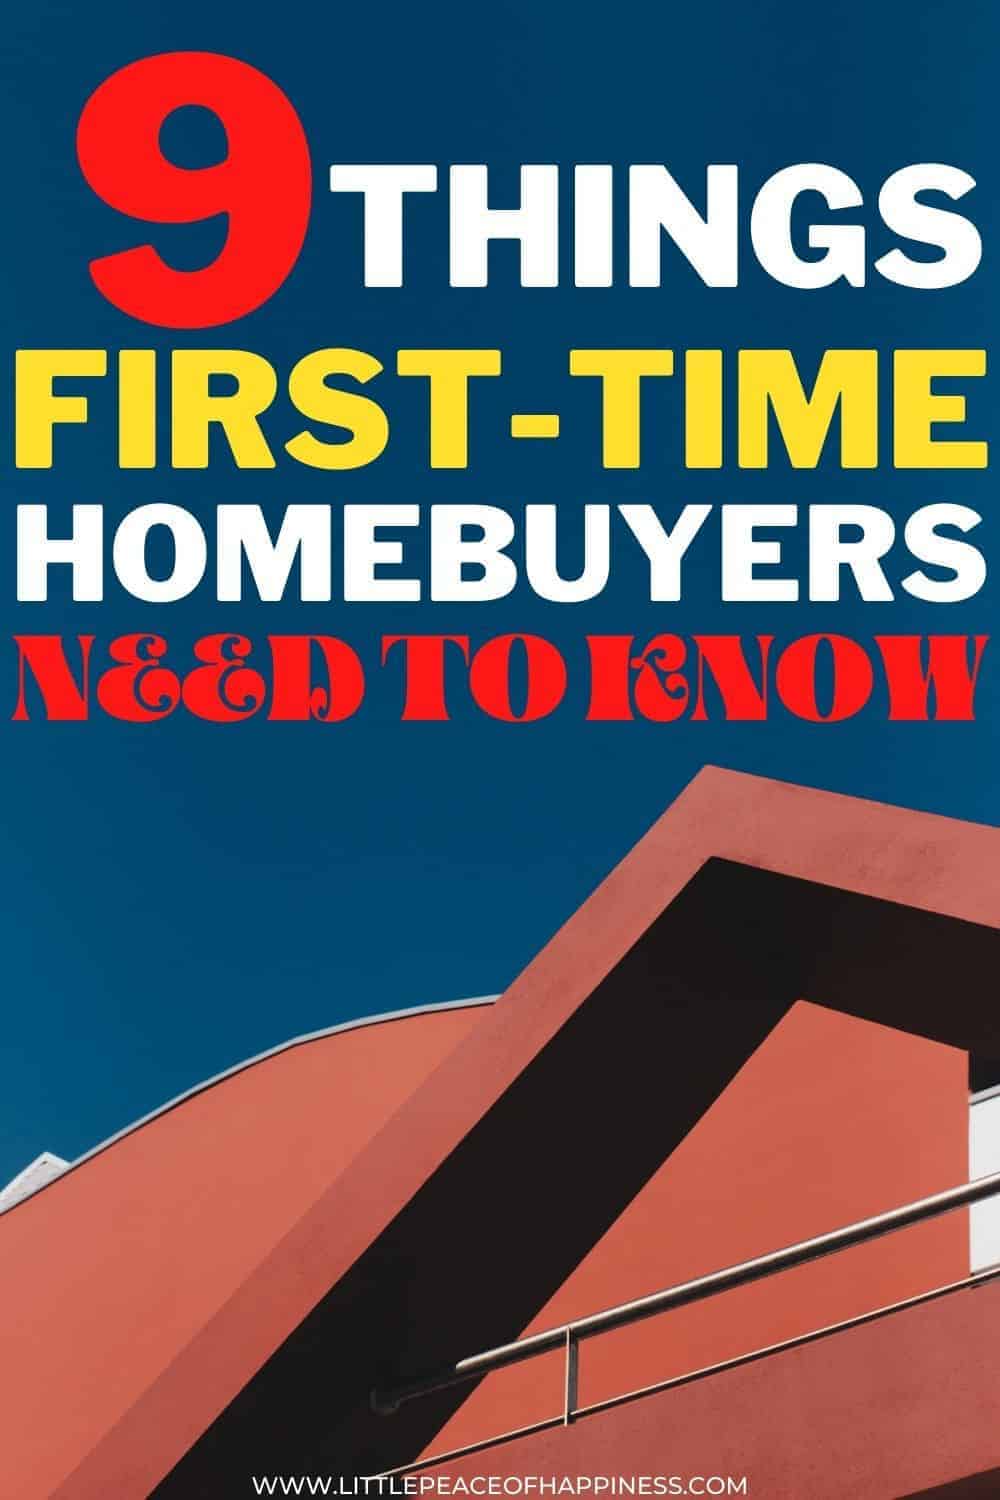 tips for homebuyers